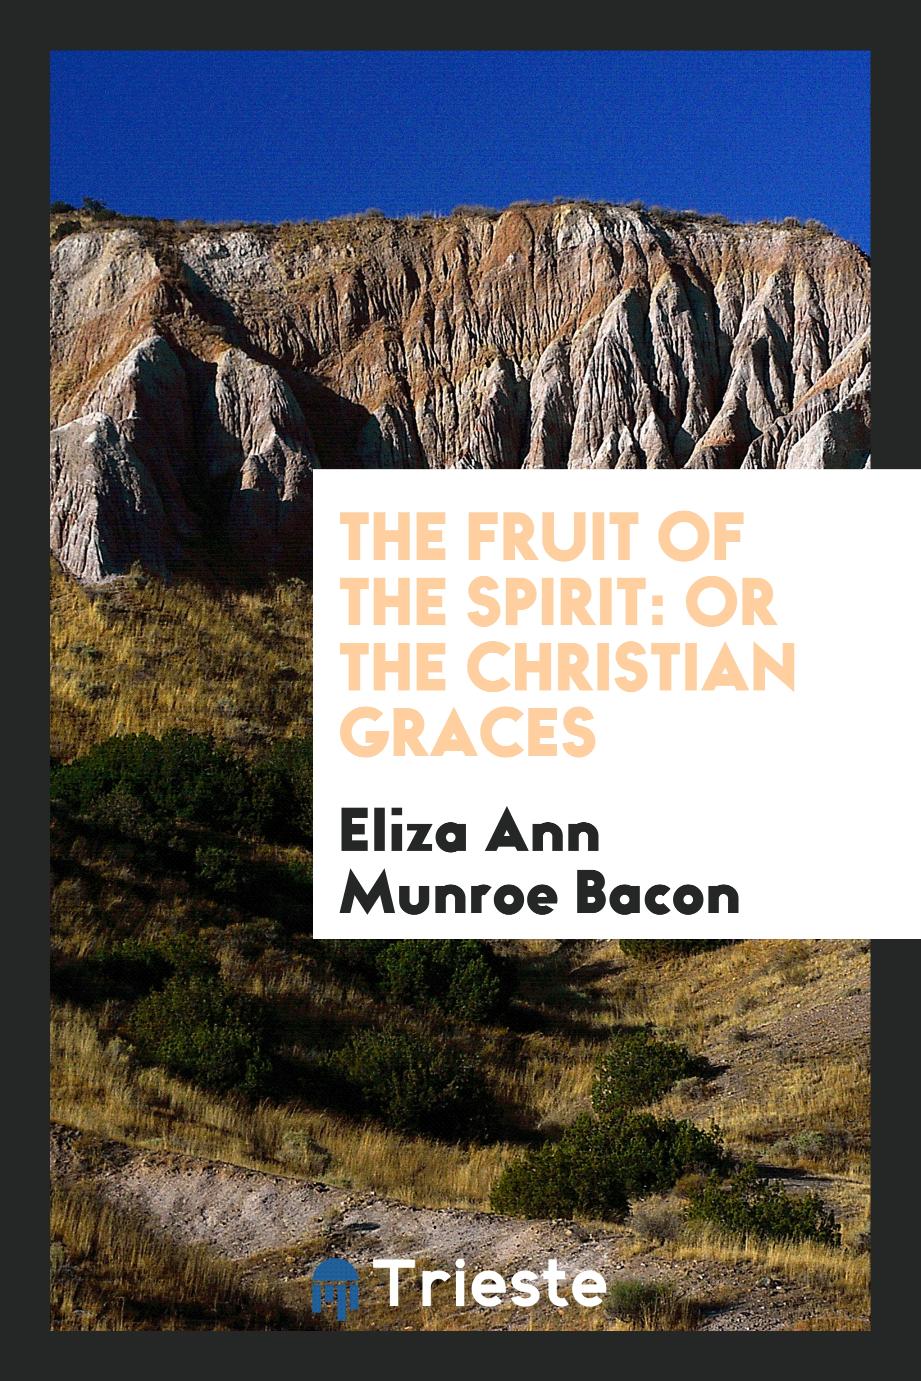 The Fruit of the Spirit: Or the Christian Graces